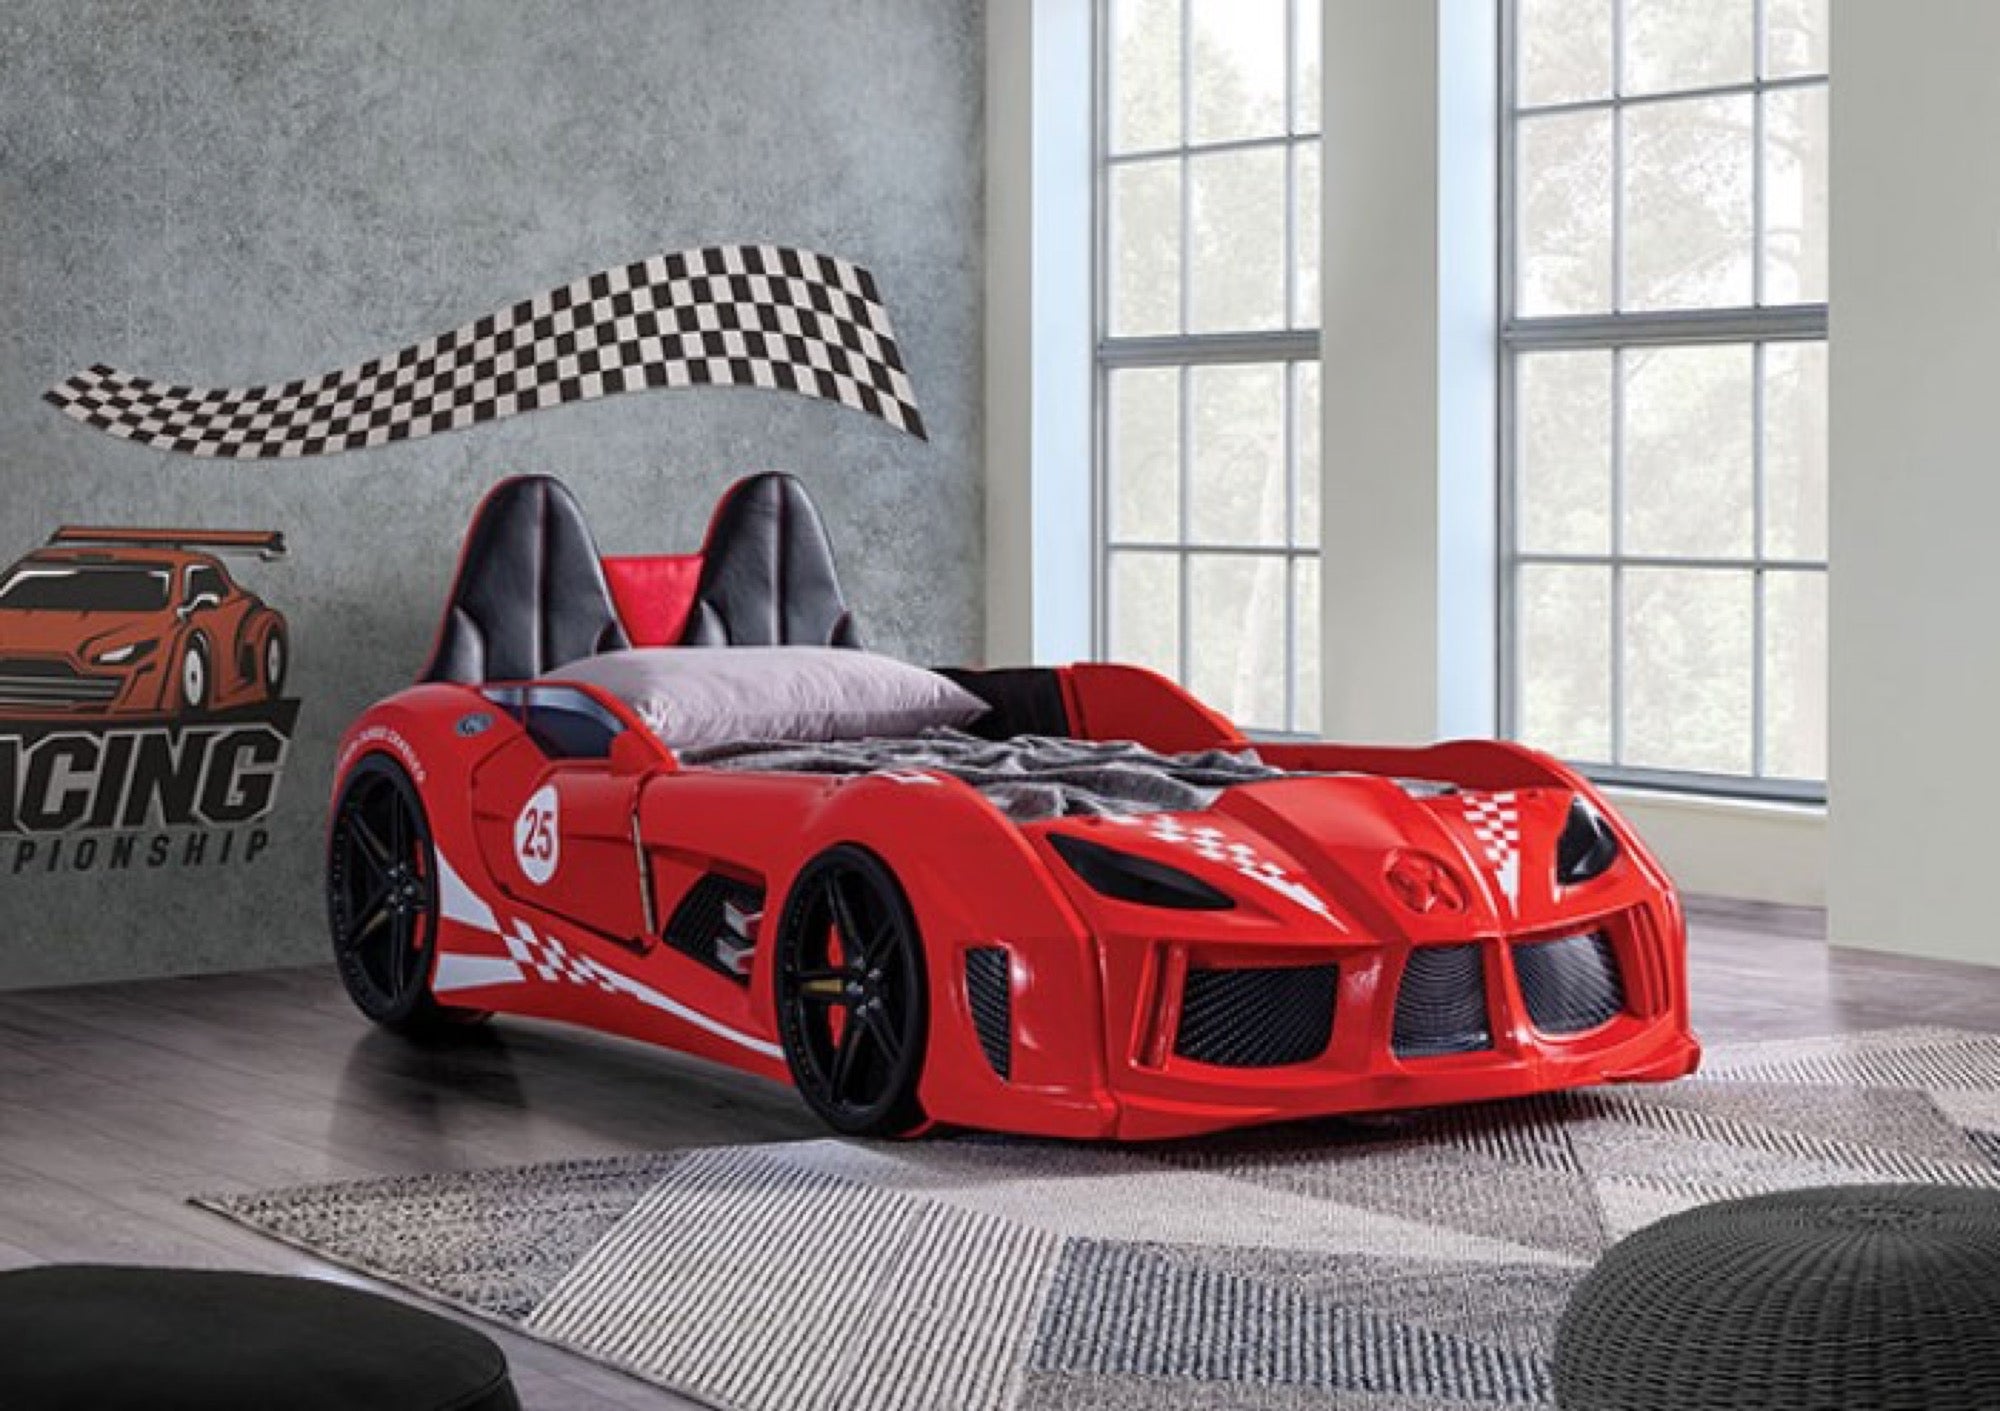 Trackster Kid's Red Race Car Bed with LED Lights